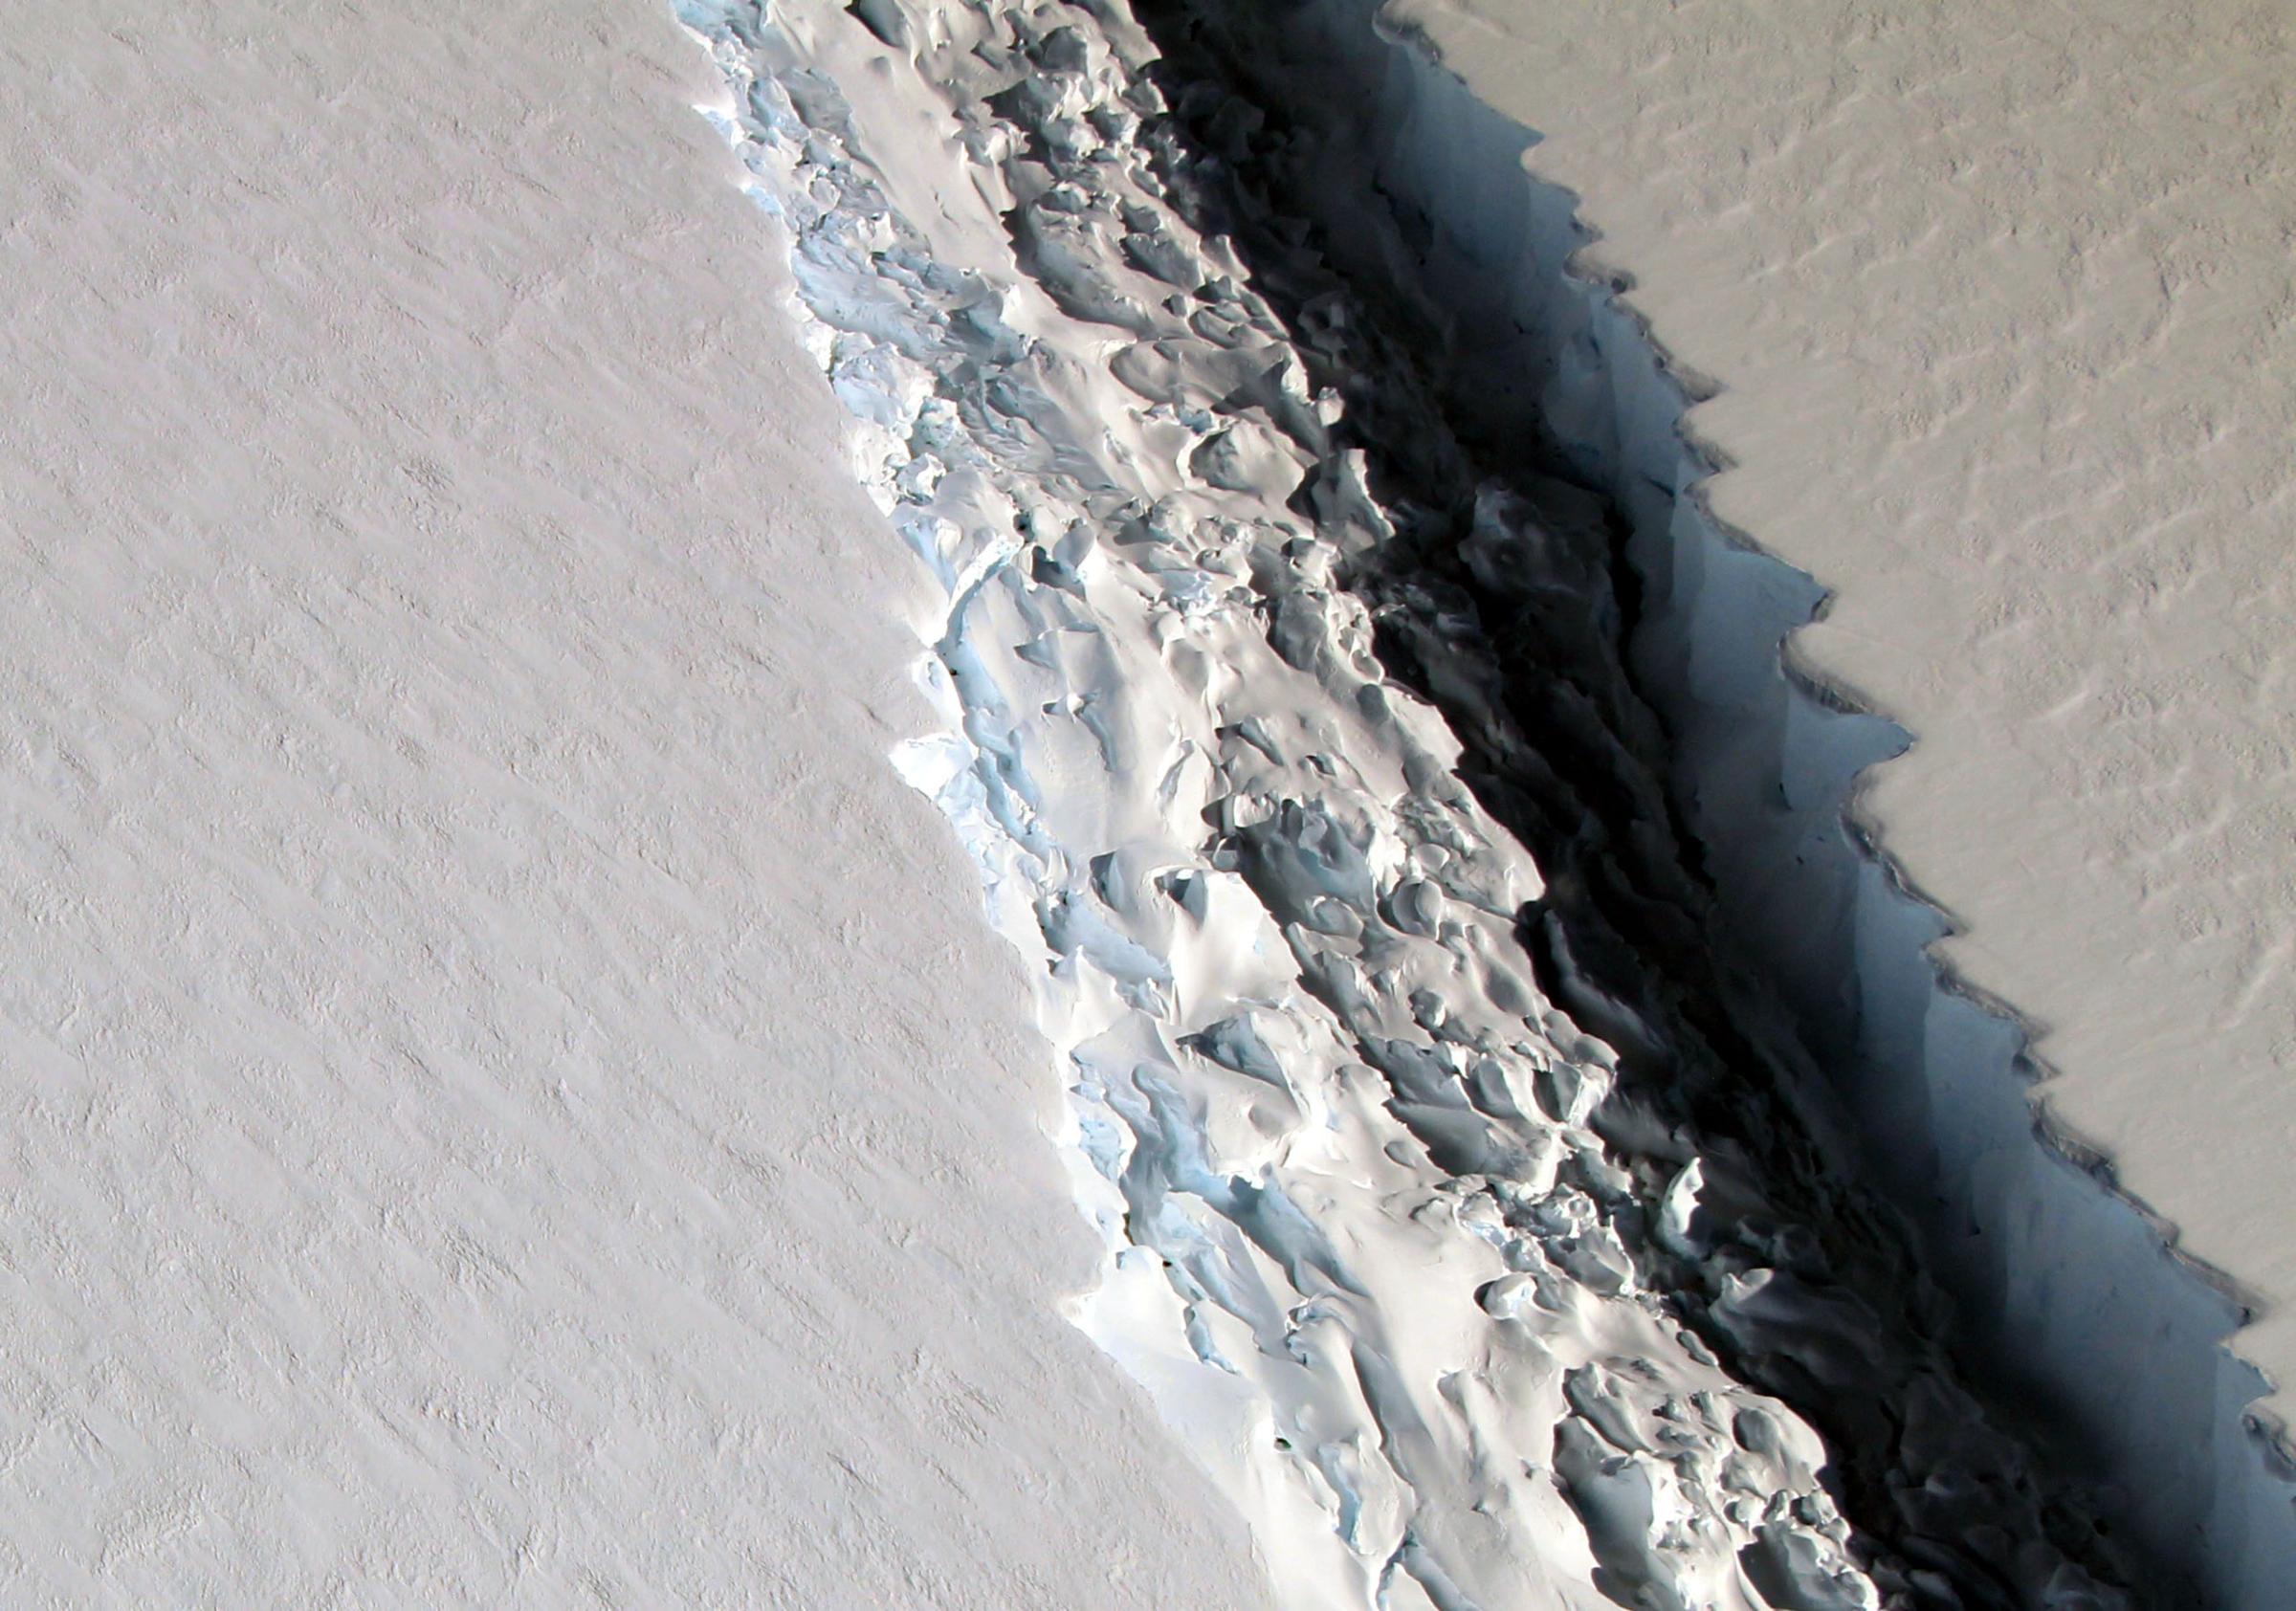 Scientists  photographed  a massive rift in the Antarctic Peninsula's Larsen C ice shelf,  Nov. 10, 2016, as part of NASA's IceBridge mission, a series of research flights  to study polar ice.